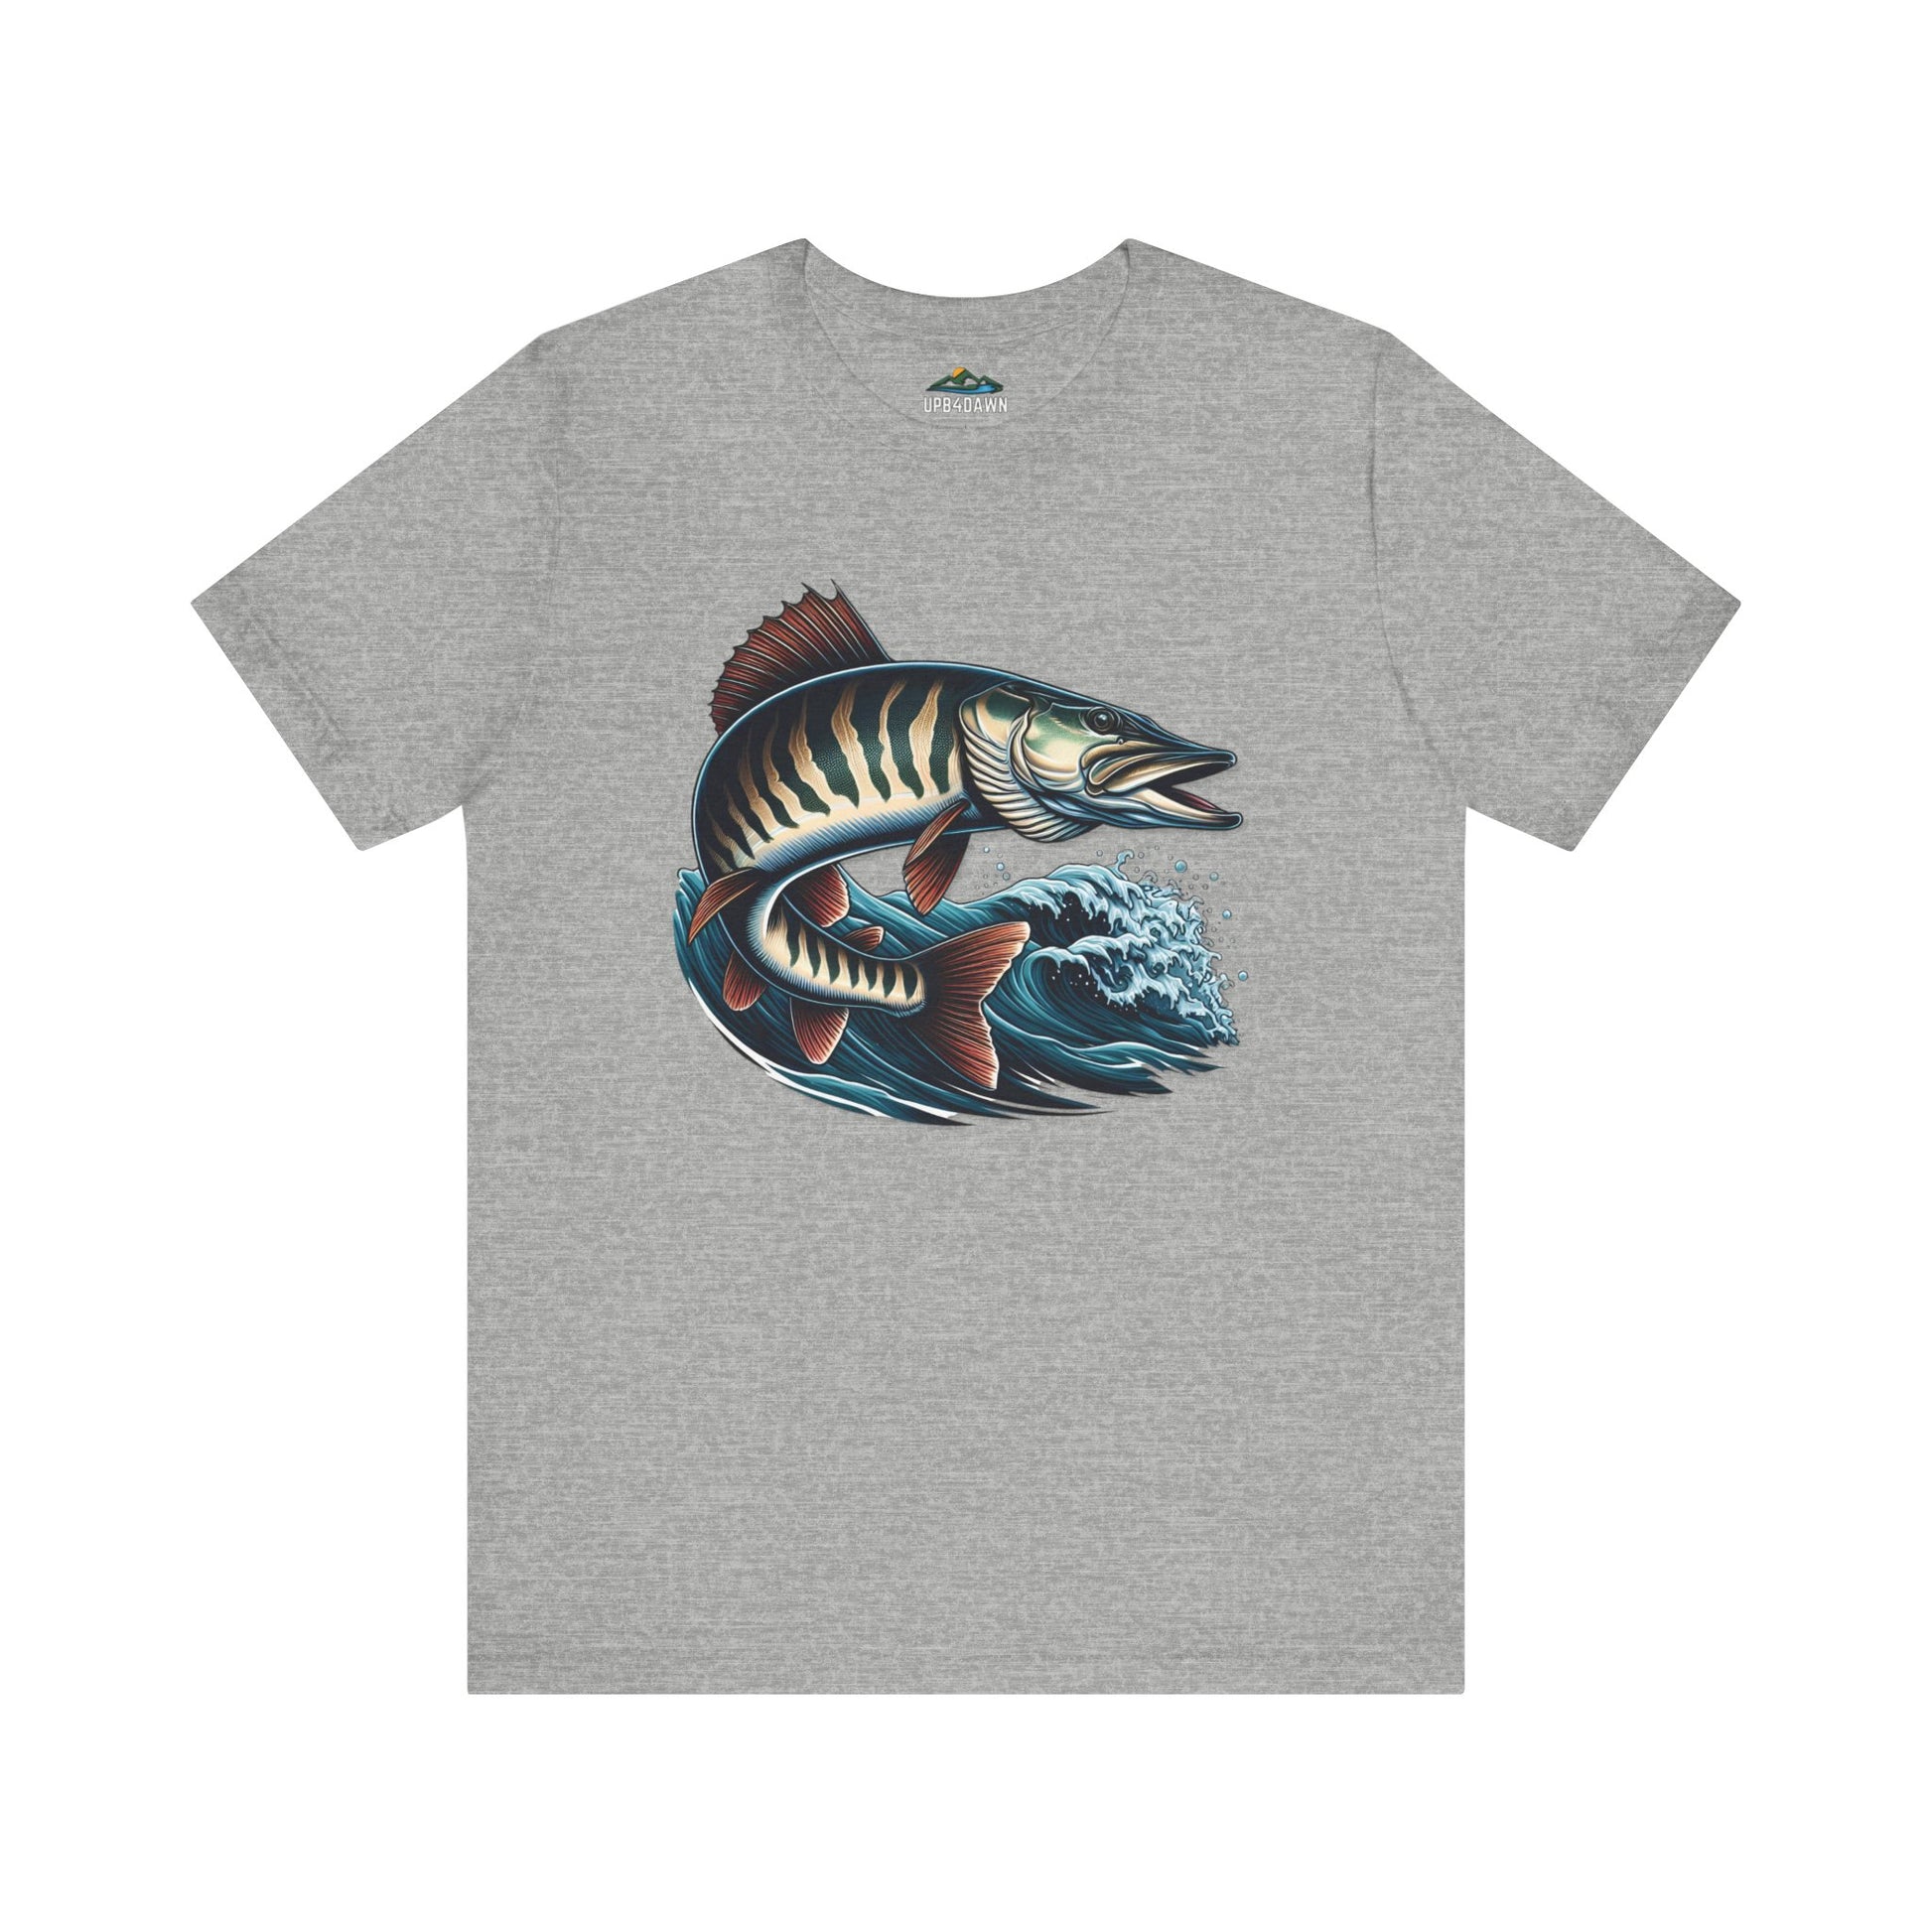 Musky Madness - T-Shirt featuring a vibrant graphic of a leaping muskellunge intertwined with blue waves, designed in a stylized, detailed art style.